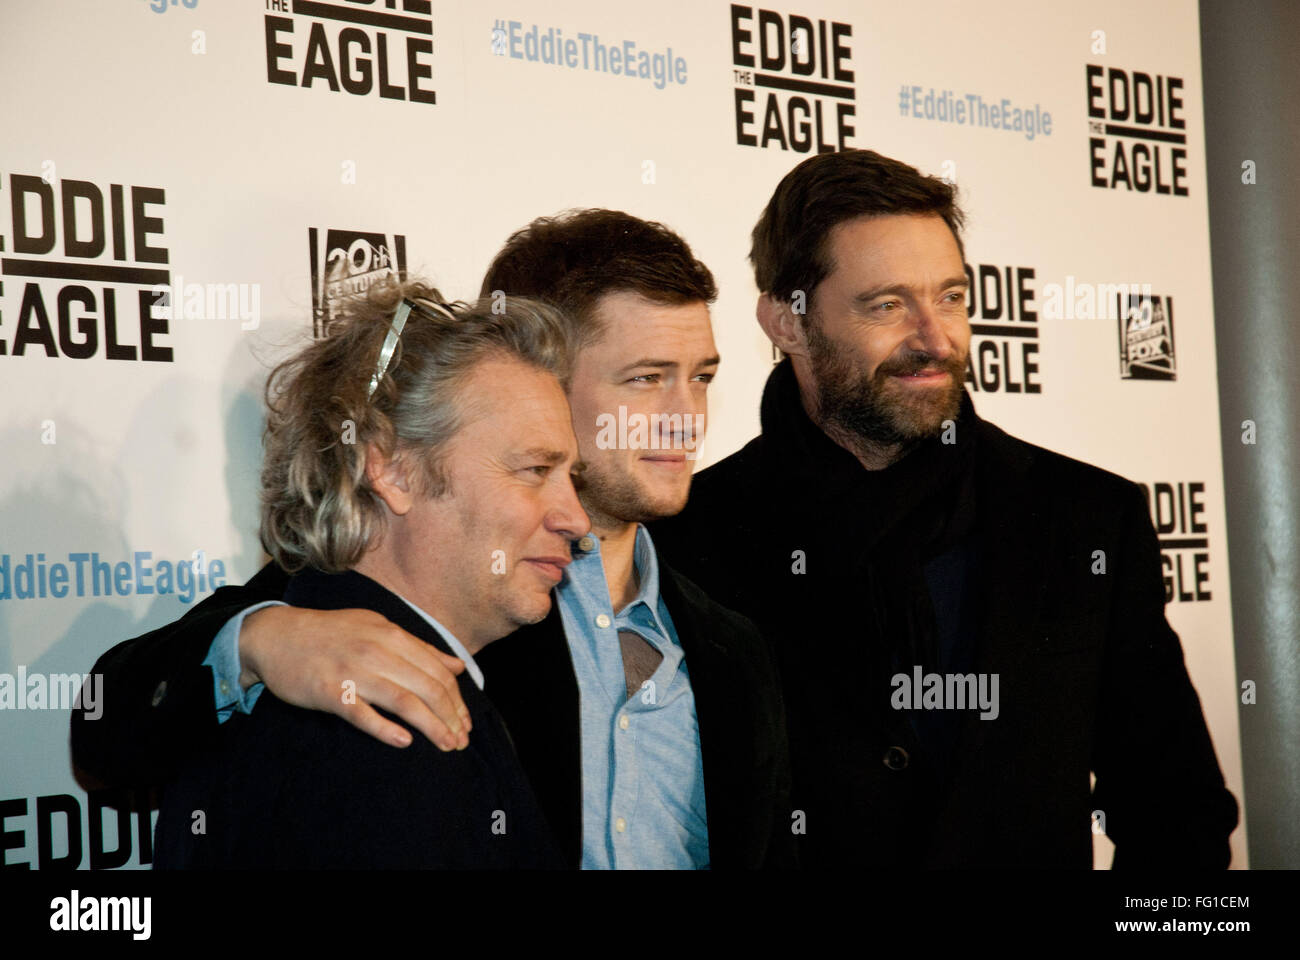 Chicago, Illinois, USA. 16th Feb, 2016. Stars of the movie Hugh Jackman and Taron Egerton with director Dexter Fletcher came to Chicago for the premiere of their new movie ''Eddie the Eagle.'' The movie is based on the true story of a British Olympic ski jumper who persevered despite the obstacles put in his way. His enthusiasm and unbounded spirit won the hearts of sports fans. Taron Egerton plays Eddie Edwards, the athlete depicted in this movie. © Karen I. Hirsch/ZUMA Wire/Alamy Live News Stock Photo